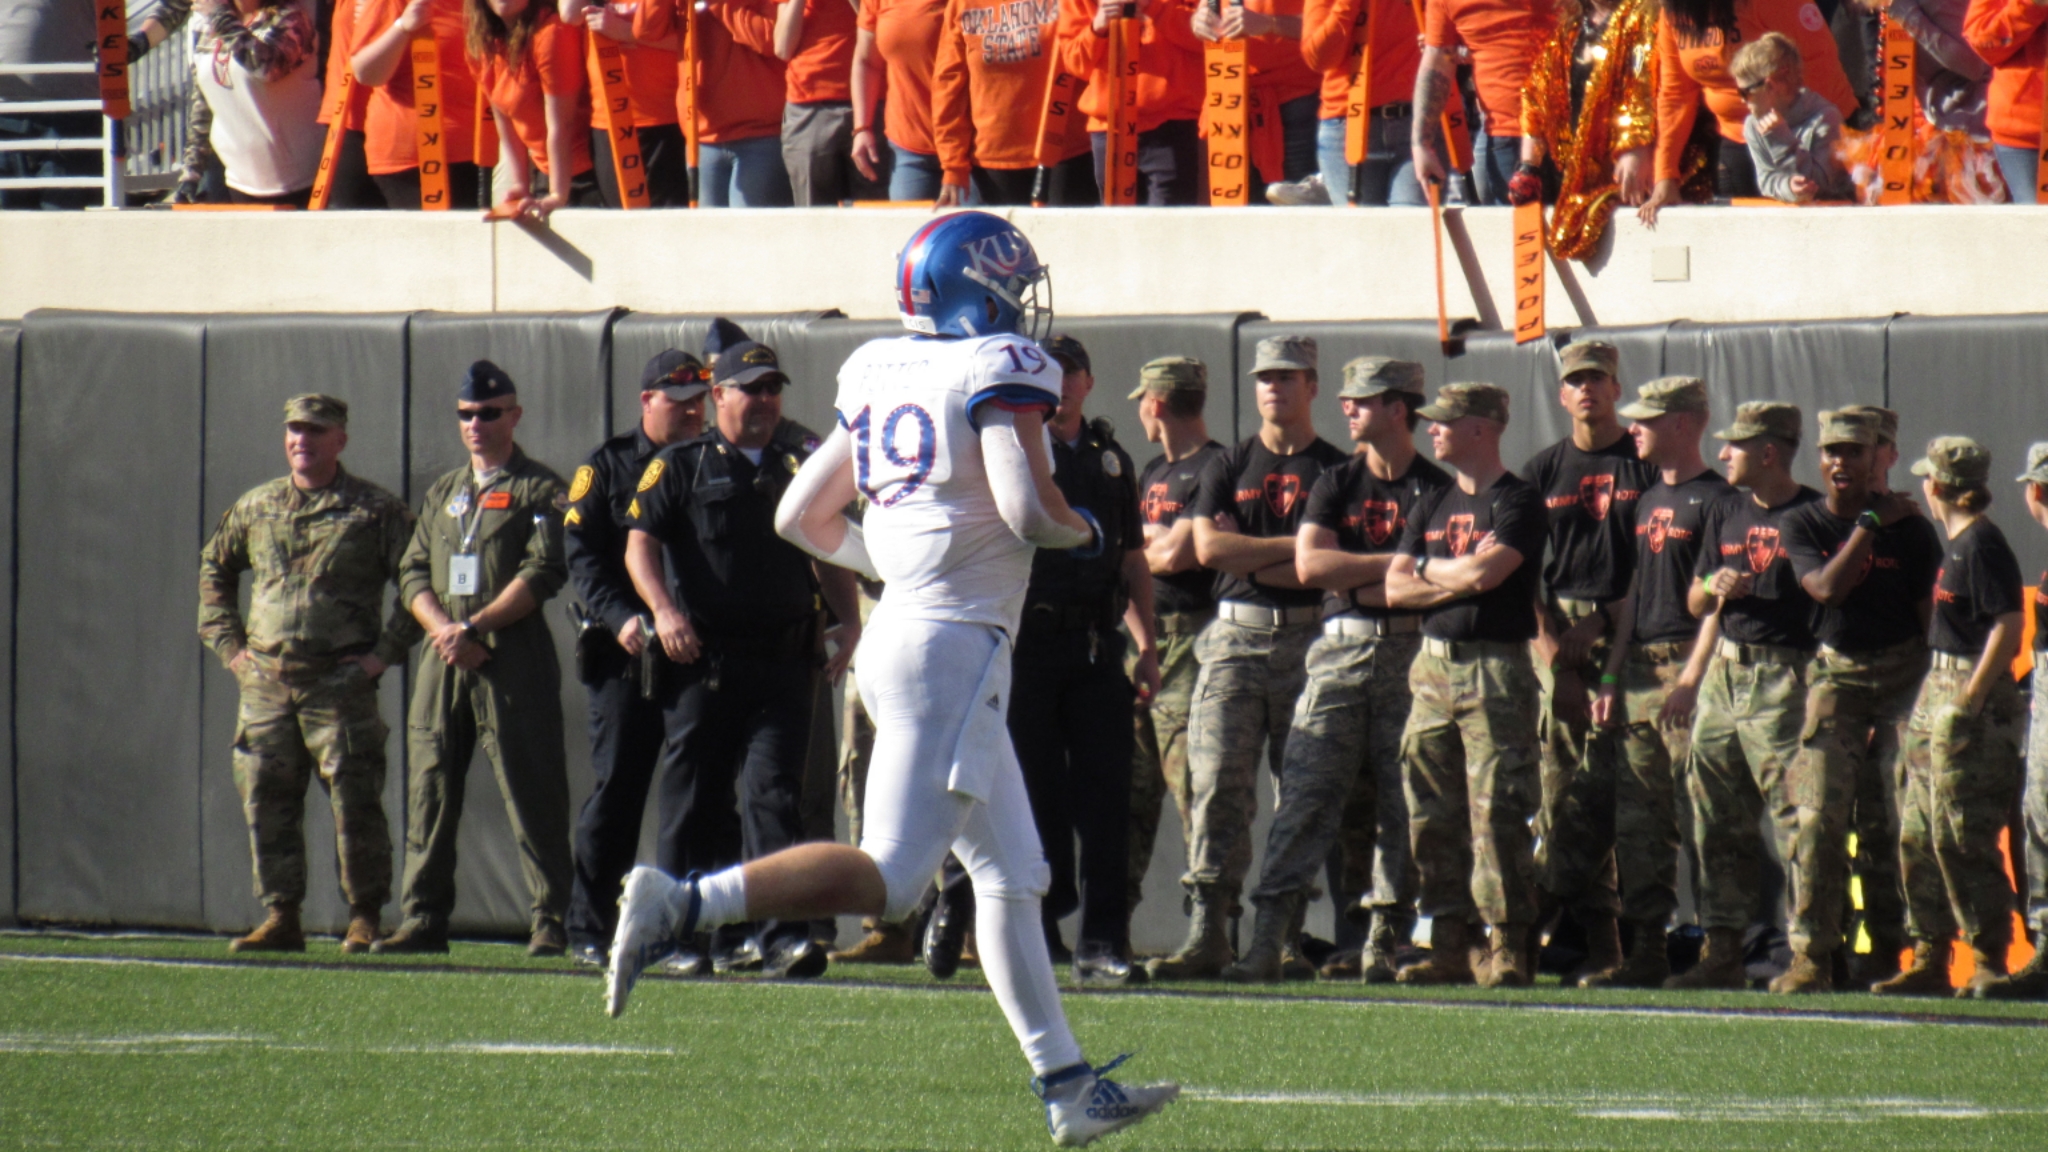 It was a Homecoming game for Jayhawks’ Gavin Potter (Mvskoke) versus Oklahoma State